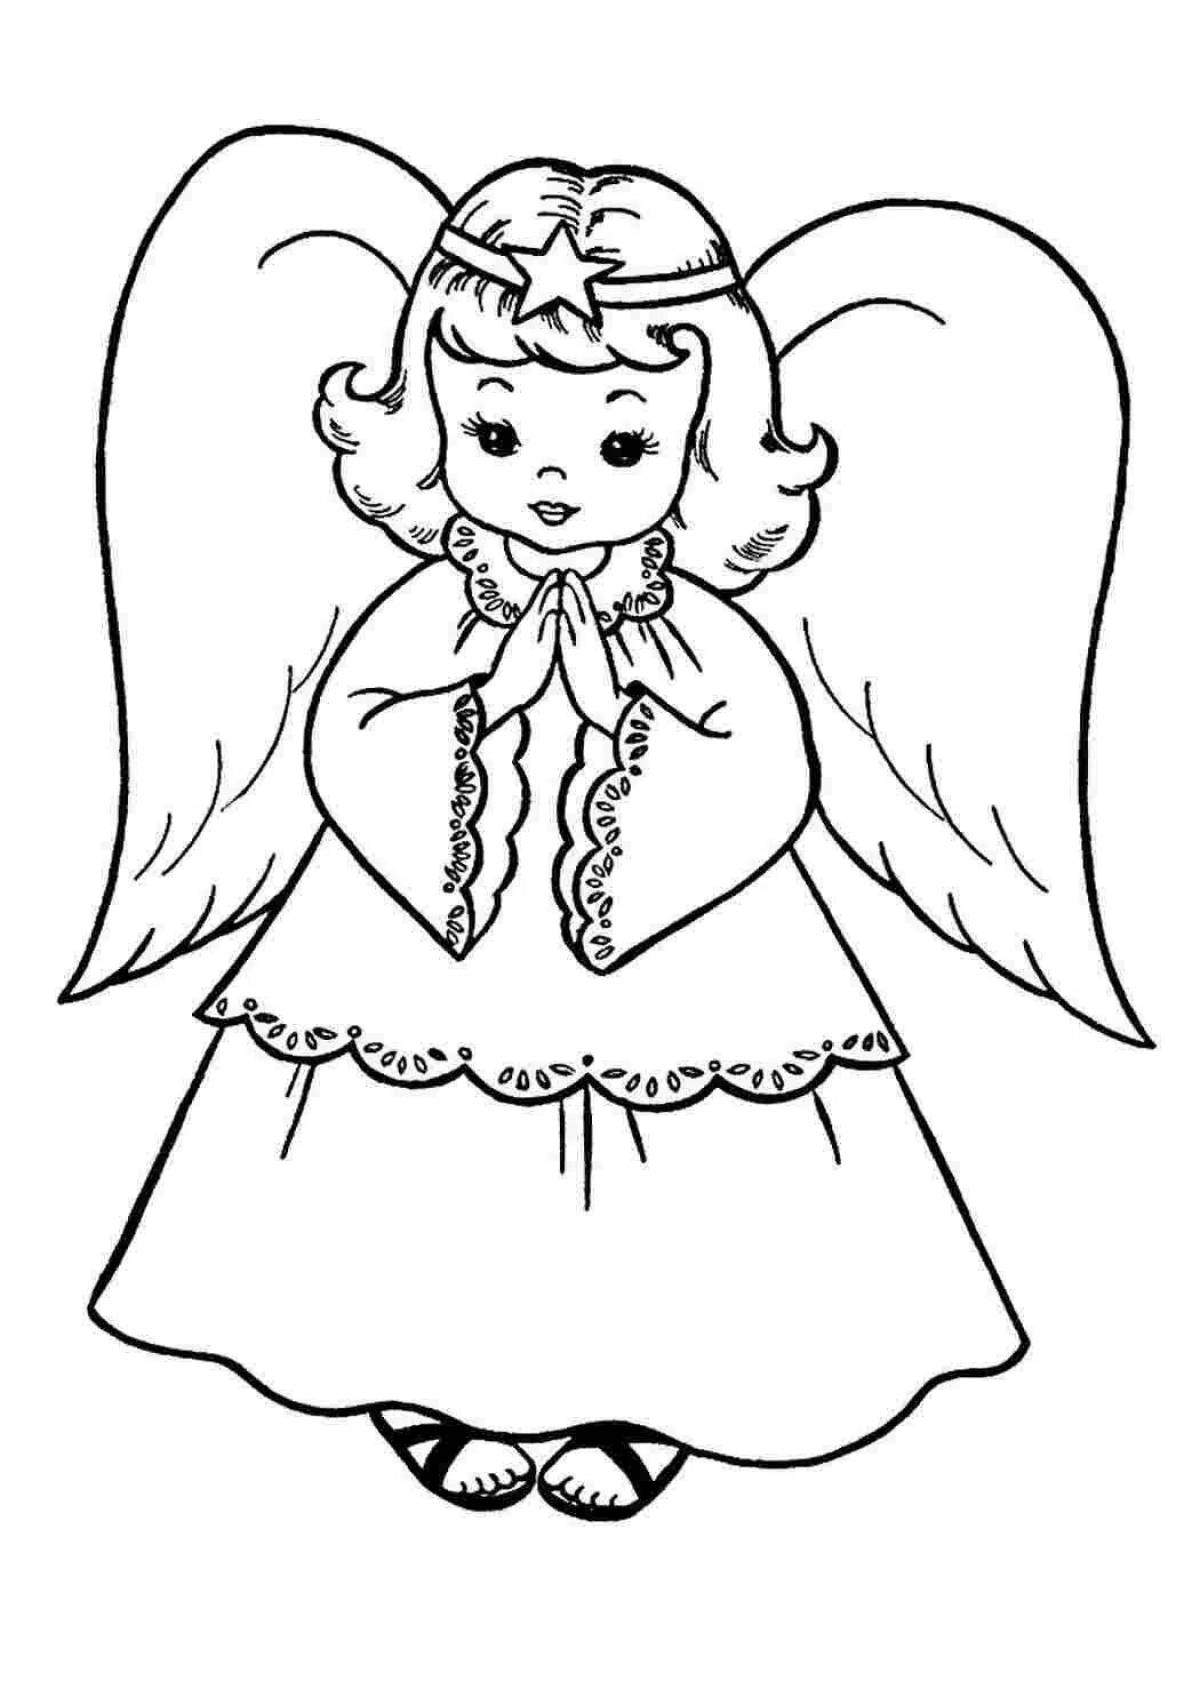 Celestial coloring angel with wings for children